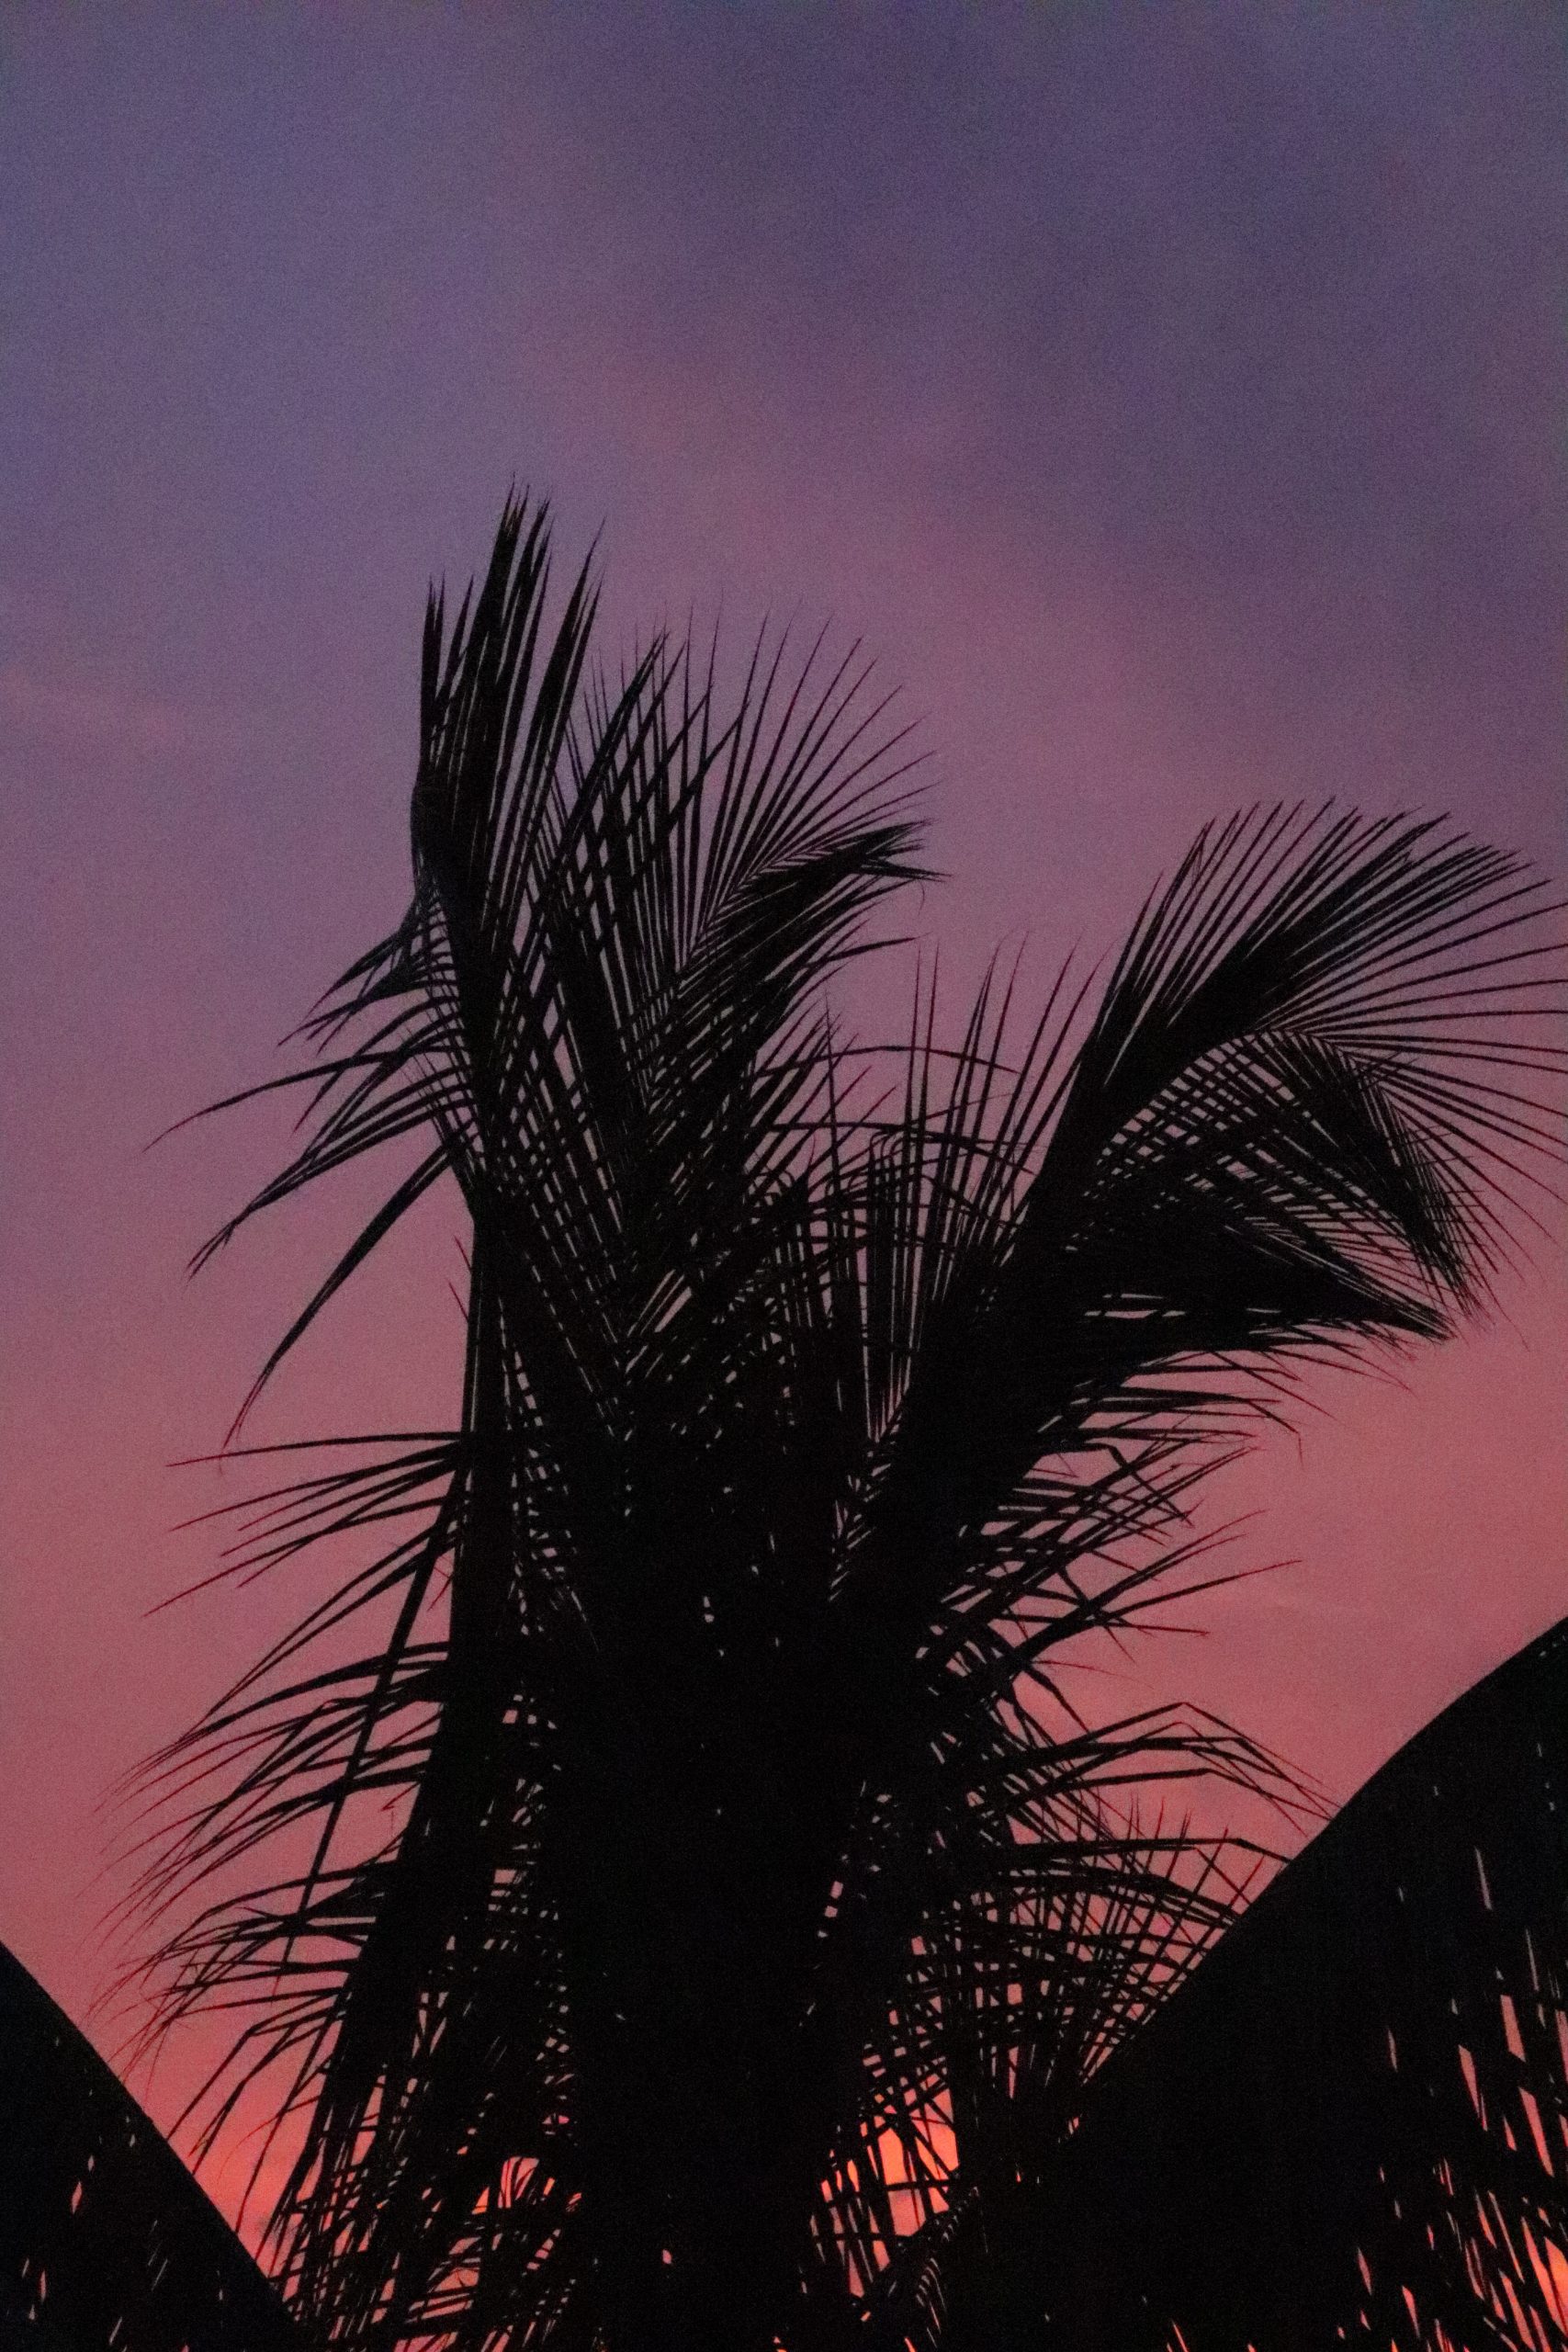 Leaves of palm trees during sunset